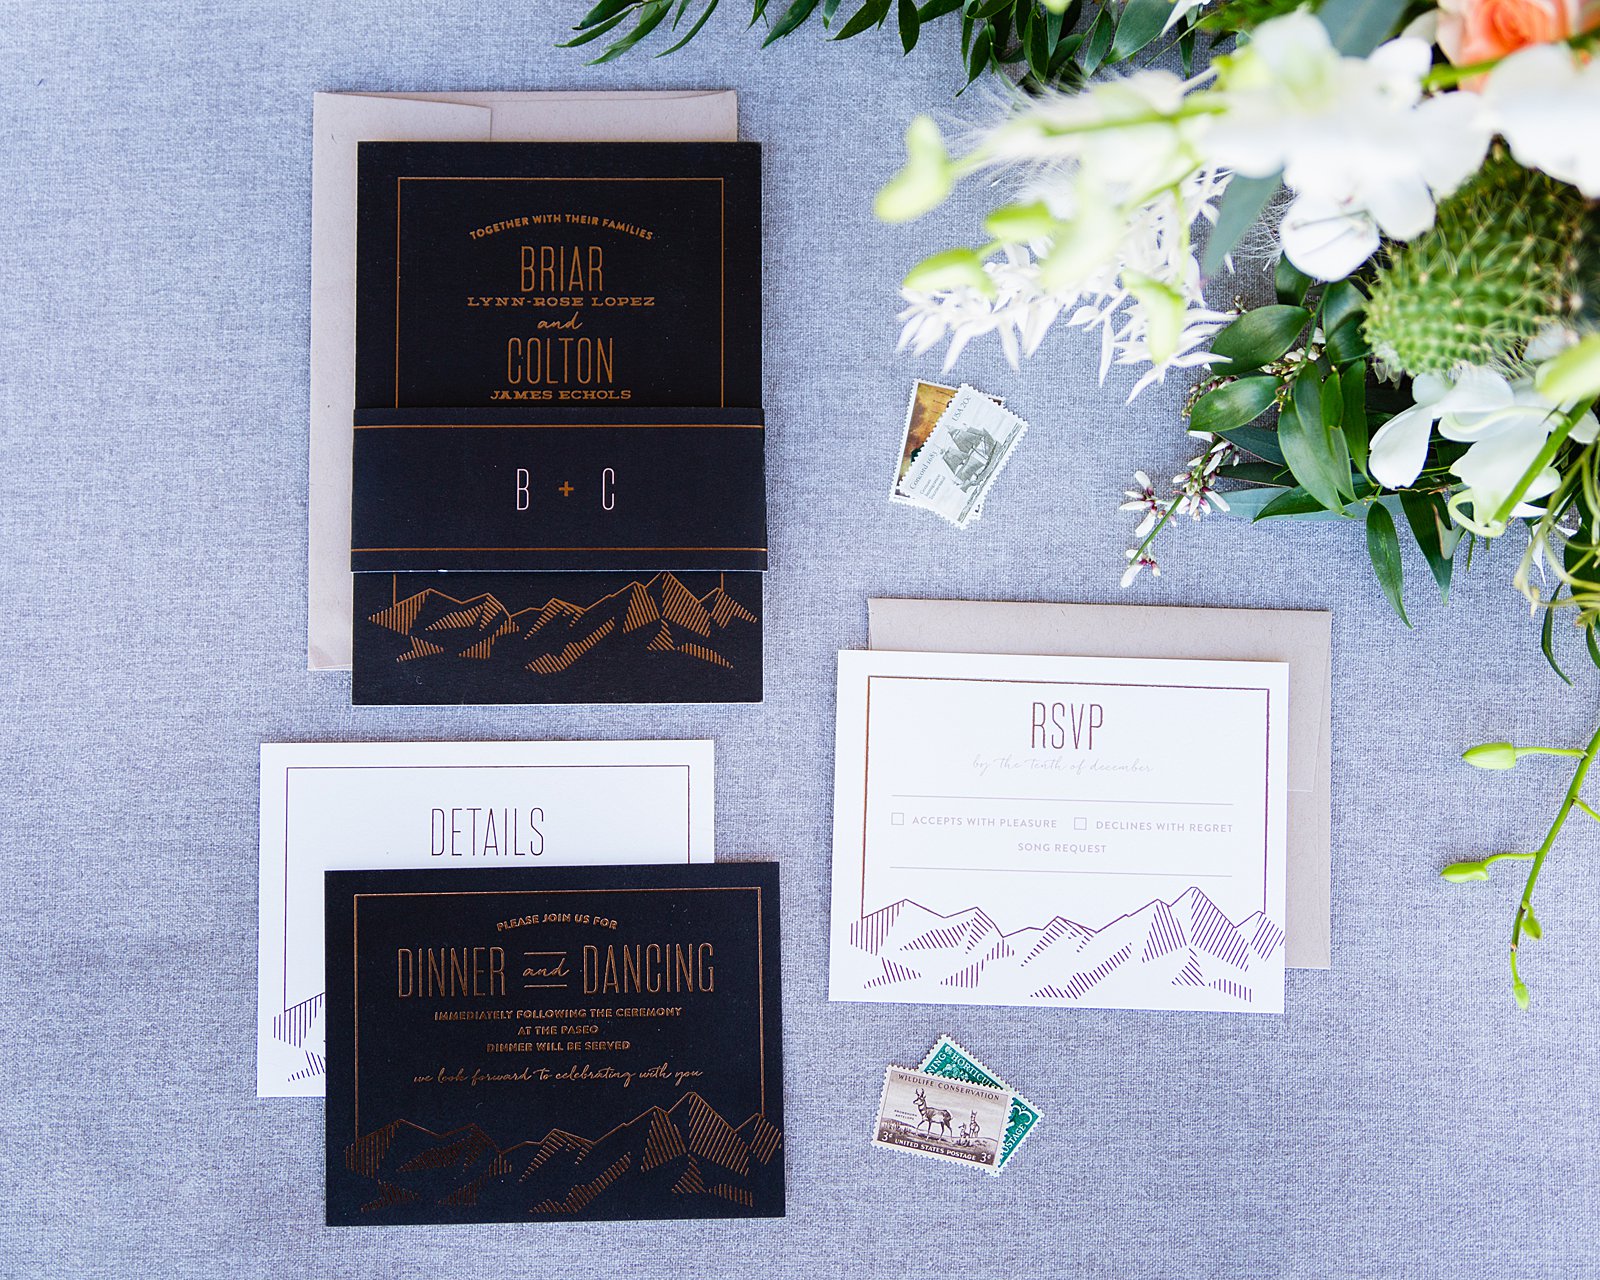 Black, copper, and tan wedding invitation suite for a desert wedding at The Paseo by wedding photographer PMA Photography.